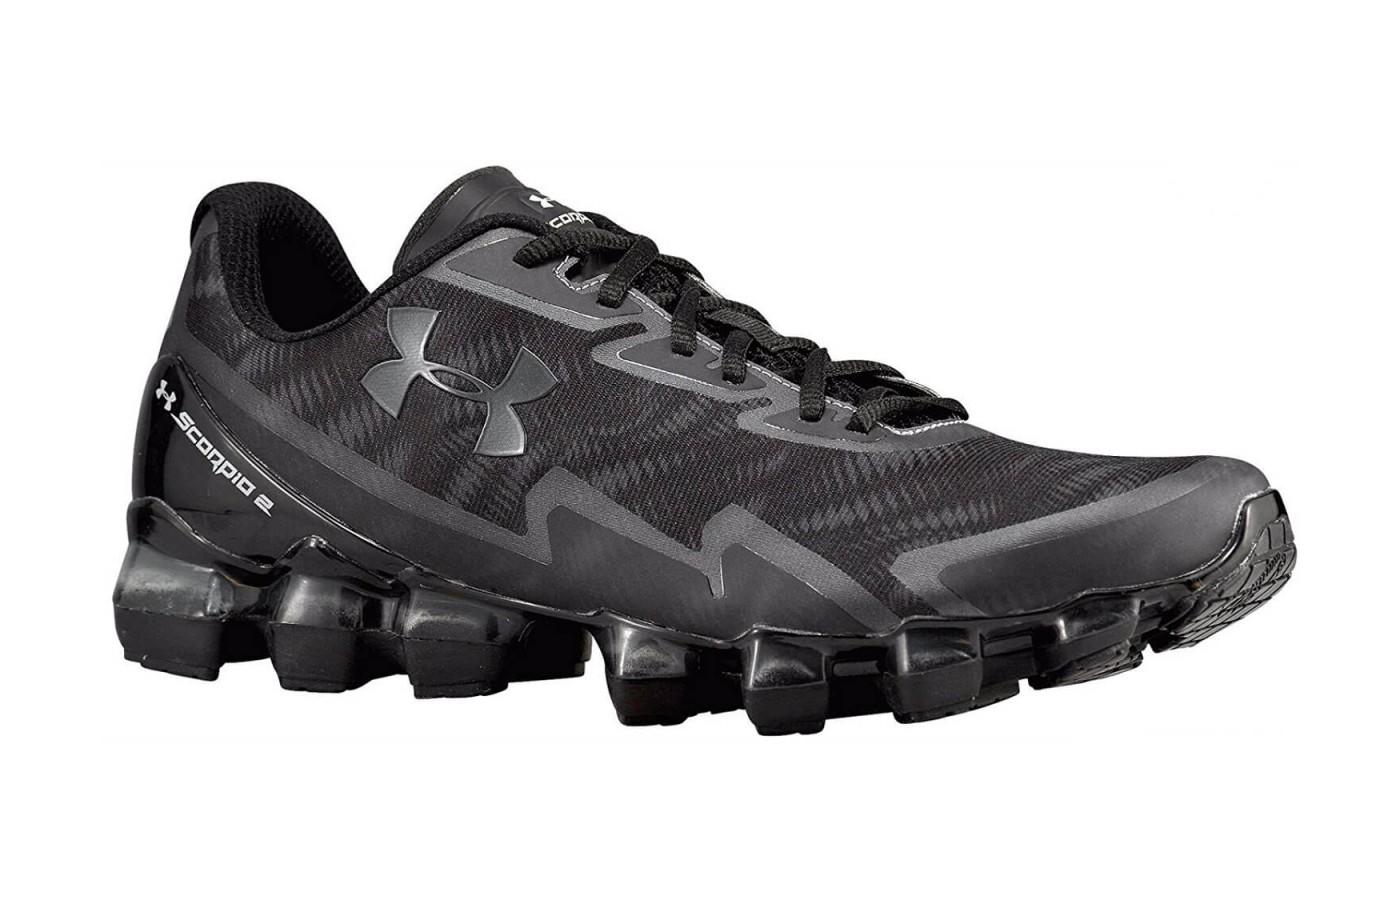 Cleat-like lugs are visible from side profile of the Under Armour Scorpio 2